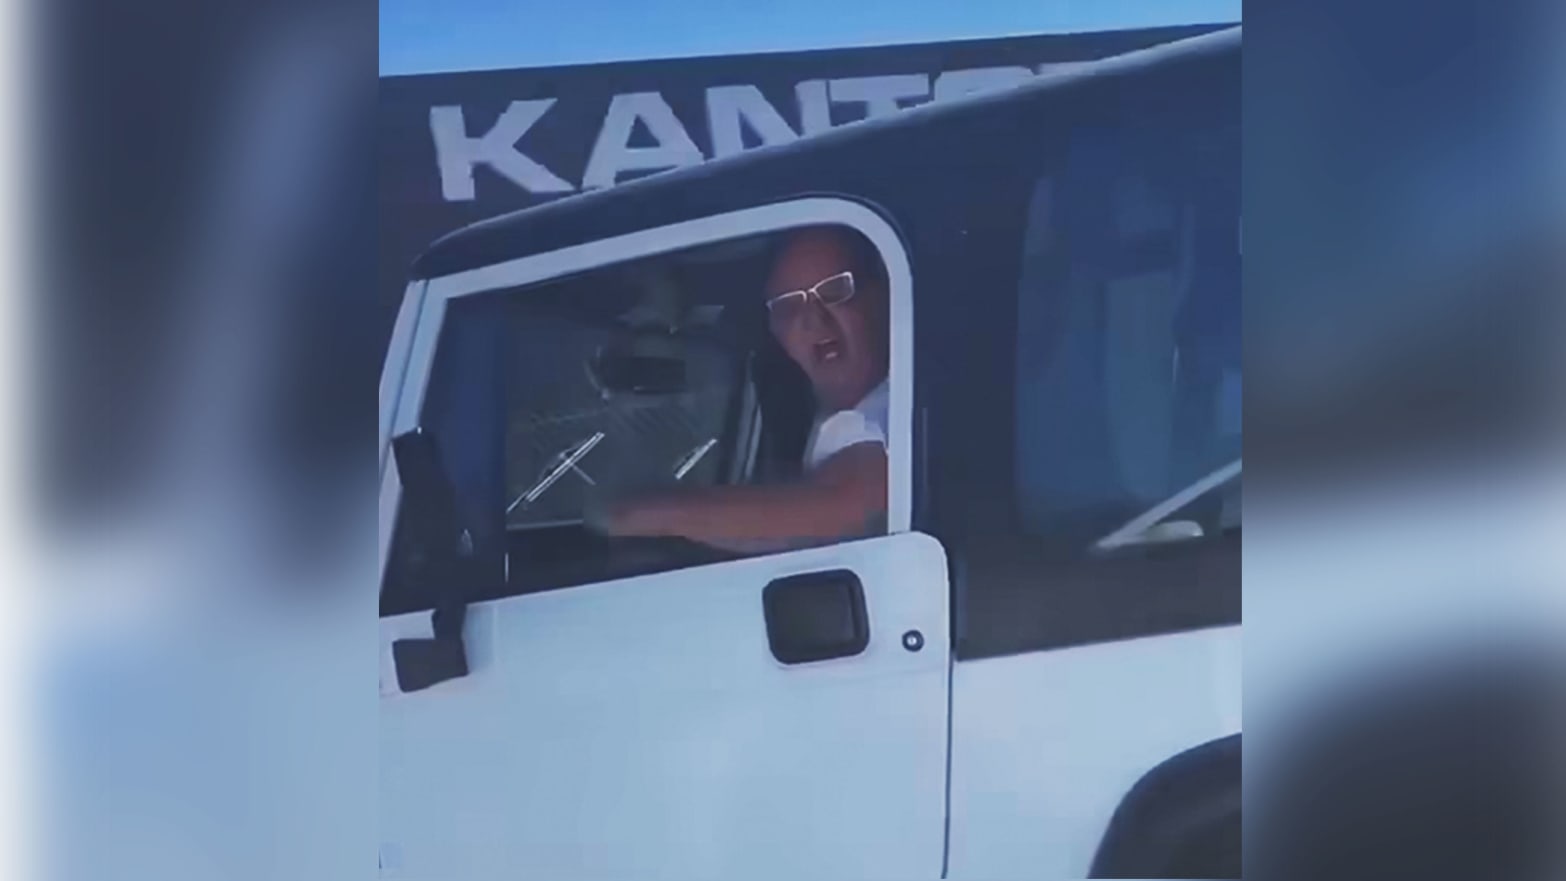 Cops Probing Wild Video of Driver Yelling Racial Slurs on Oakland Freeway